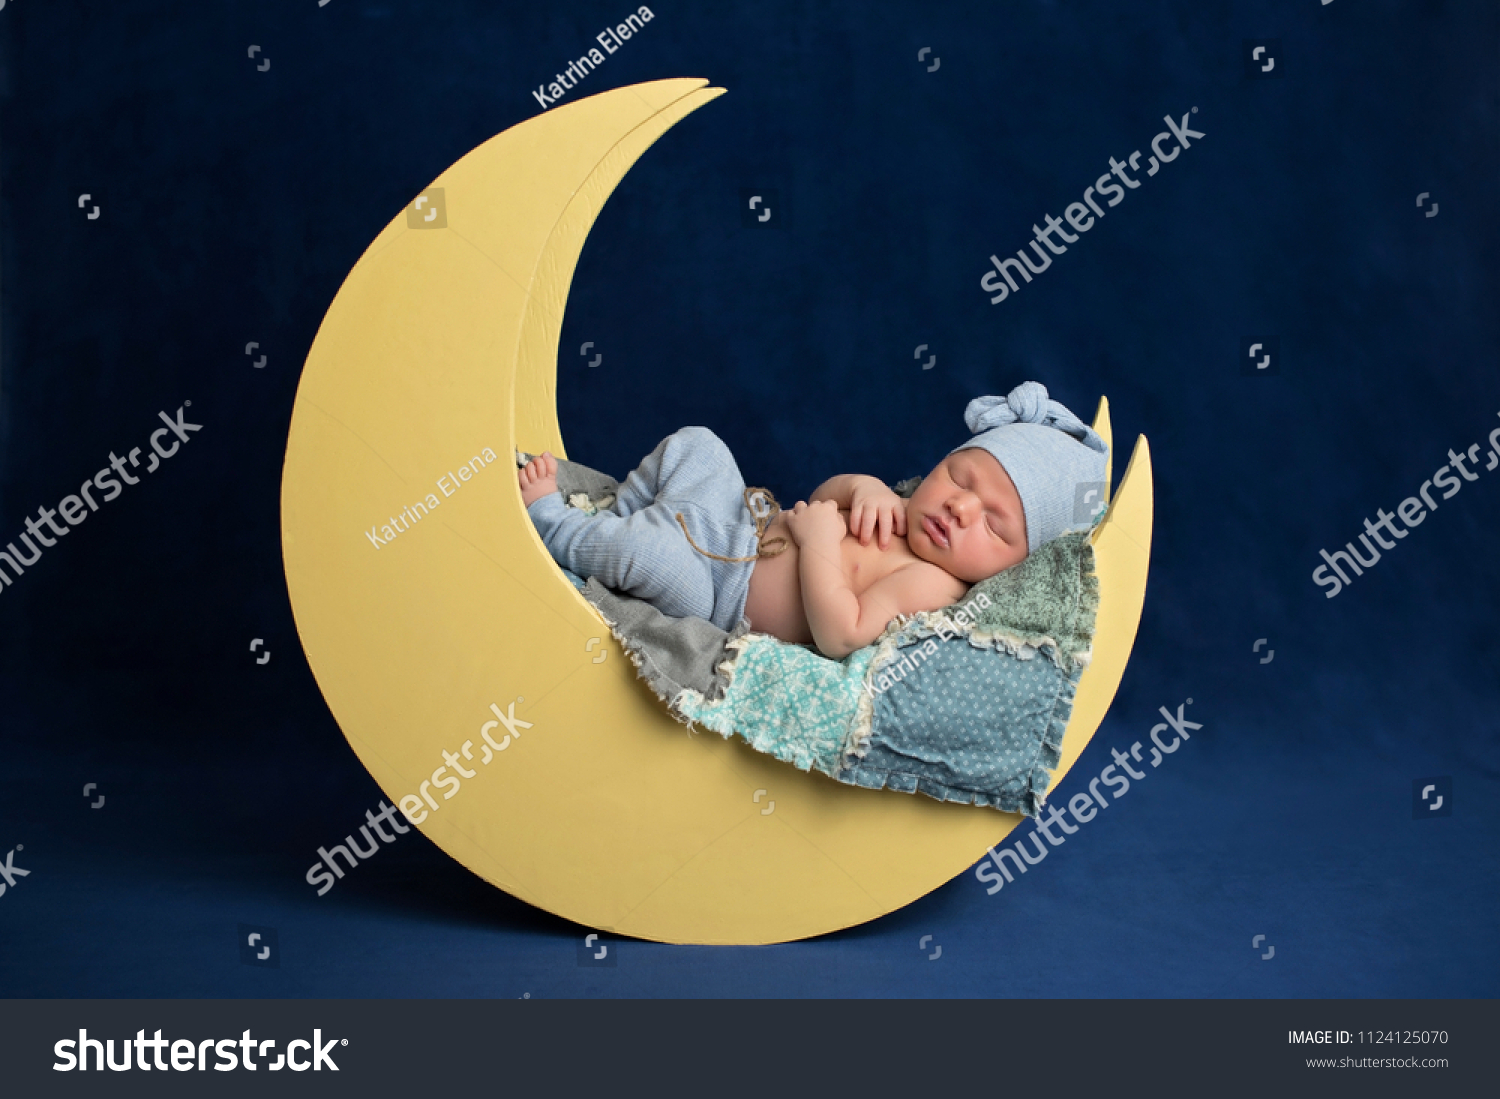 Studio portrait of a ten day old newborn baby boy wearing pajama bottoms and a sleeping cap. He is sleeping on a moon shaped posing prop. #1124125070